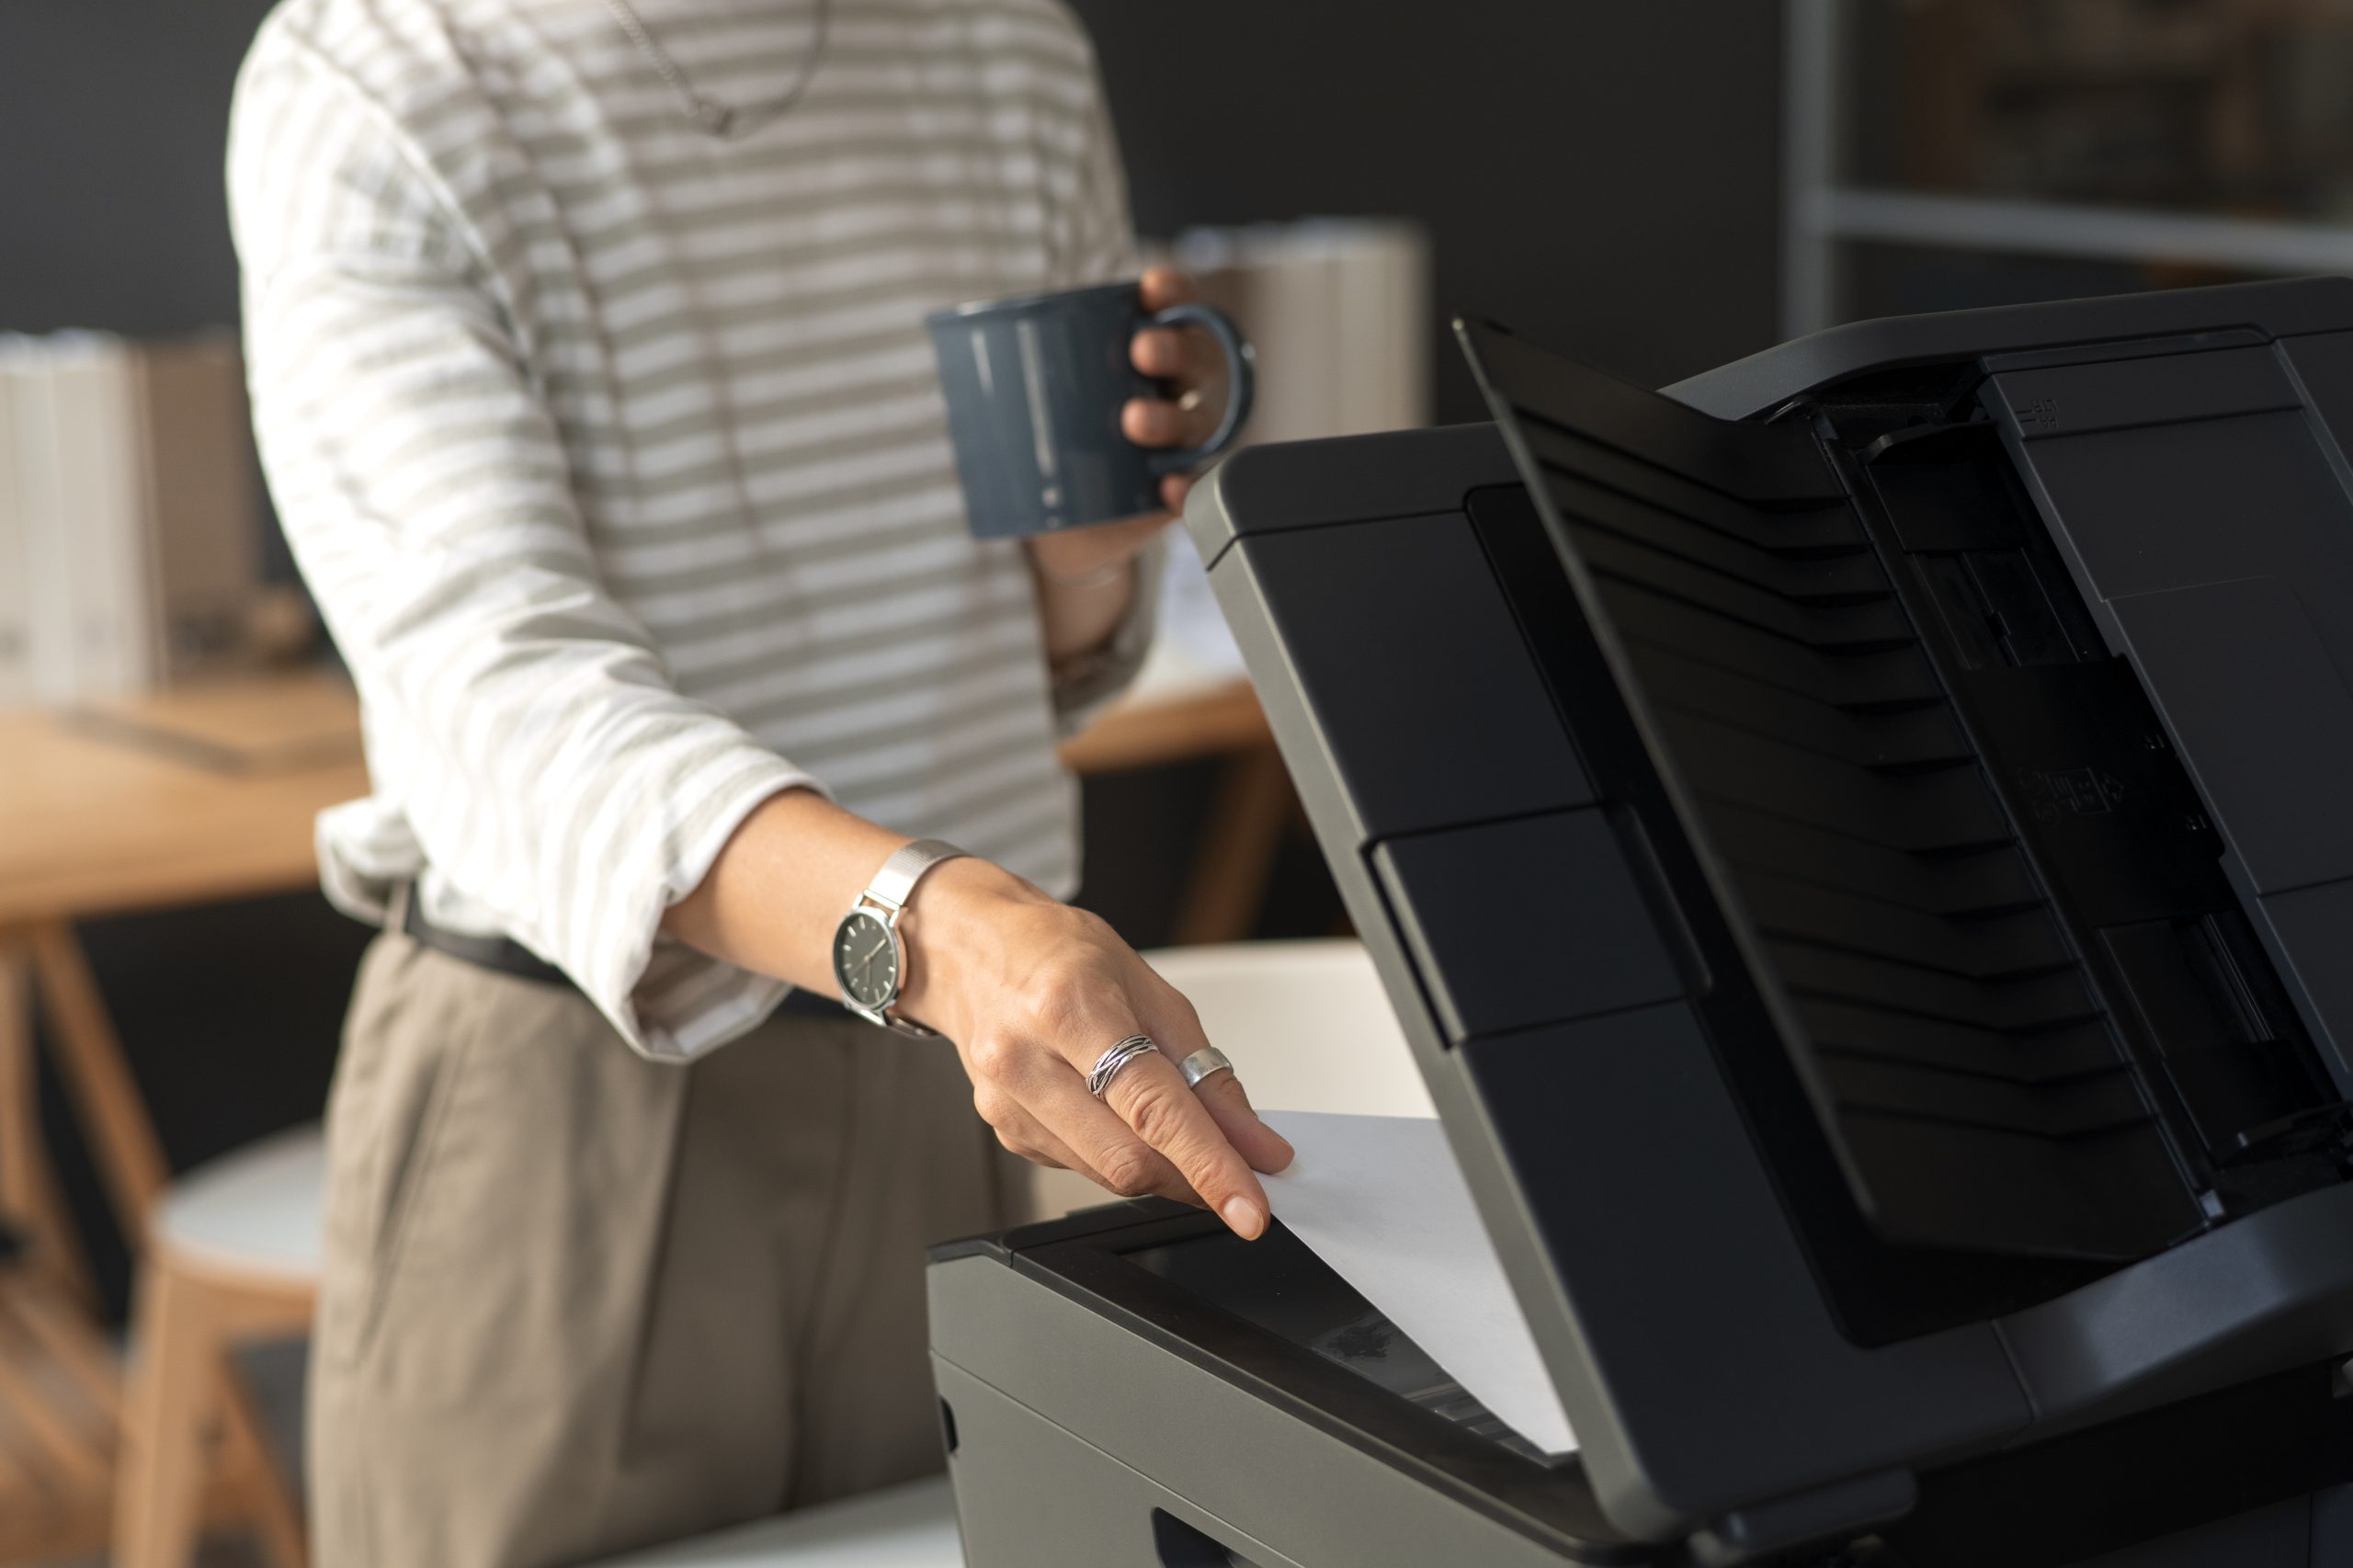 Does your Organisation Need Managed Print Services? Let's Find Out!